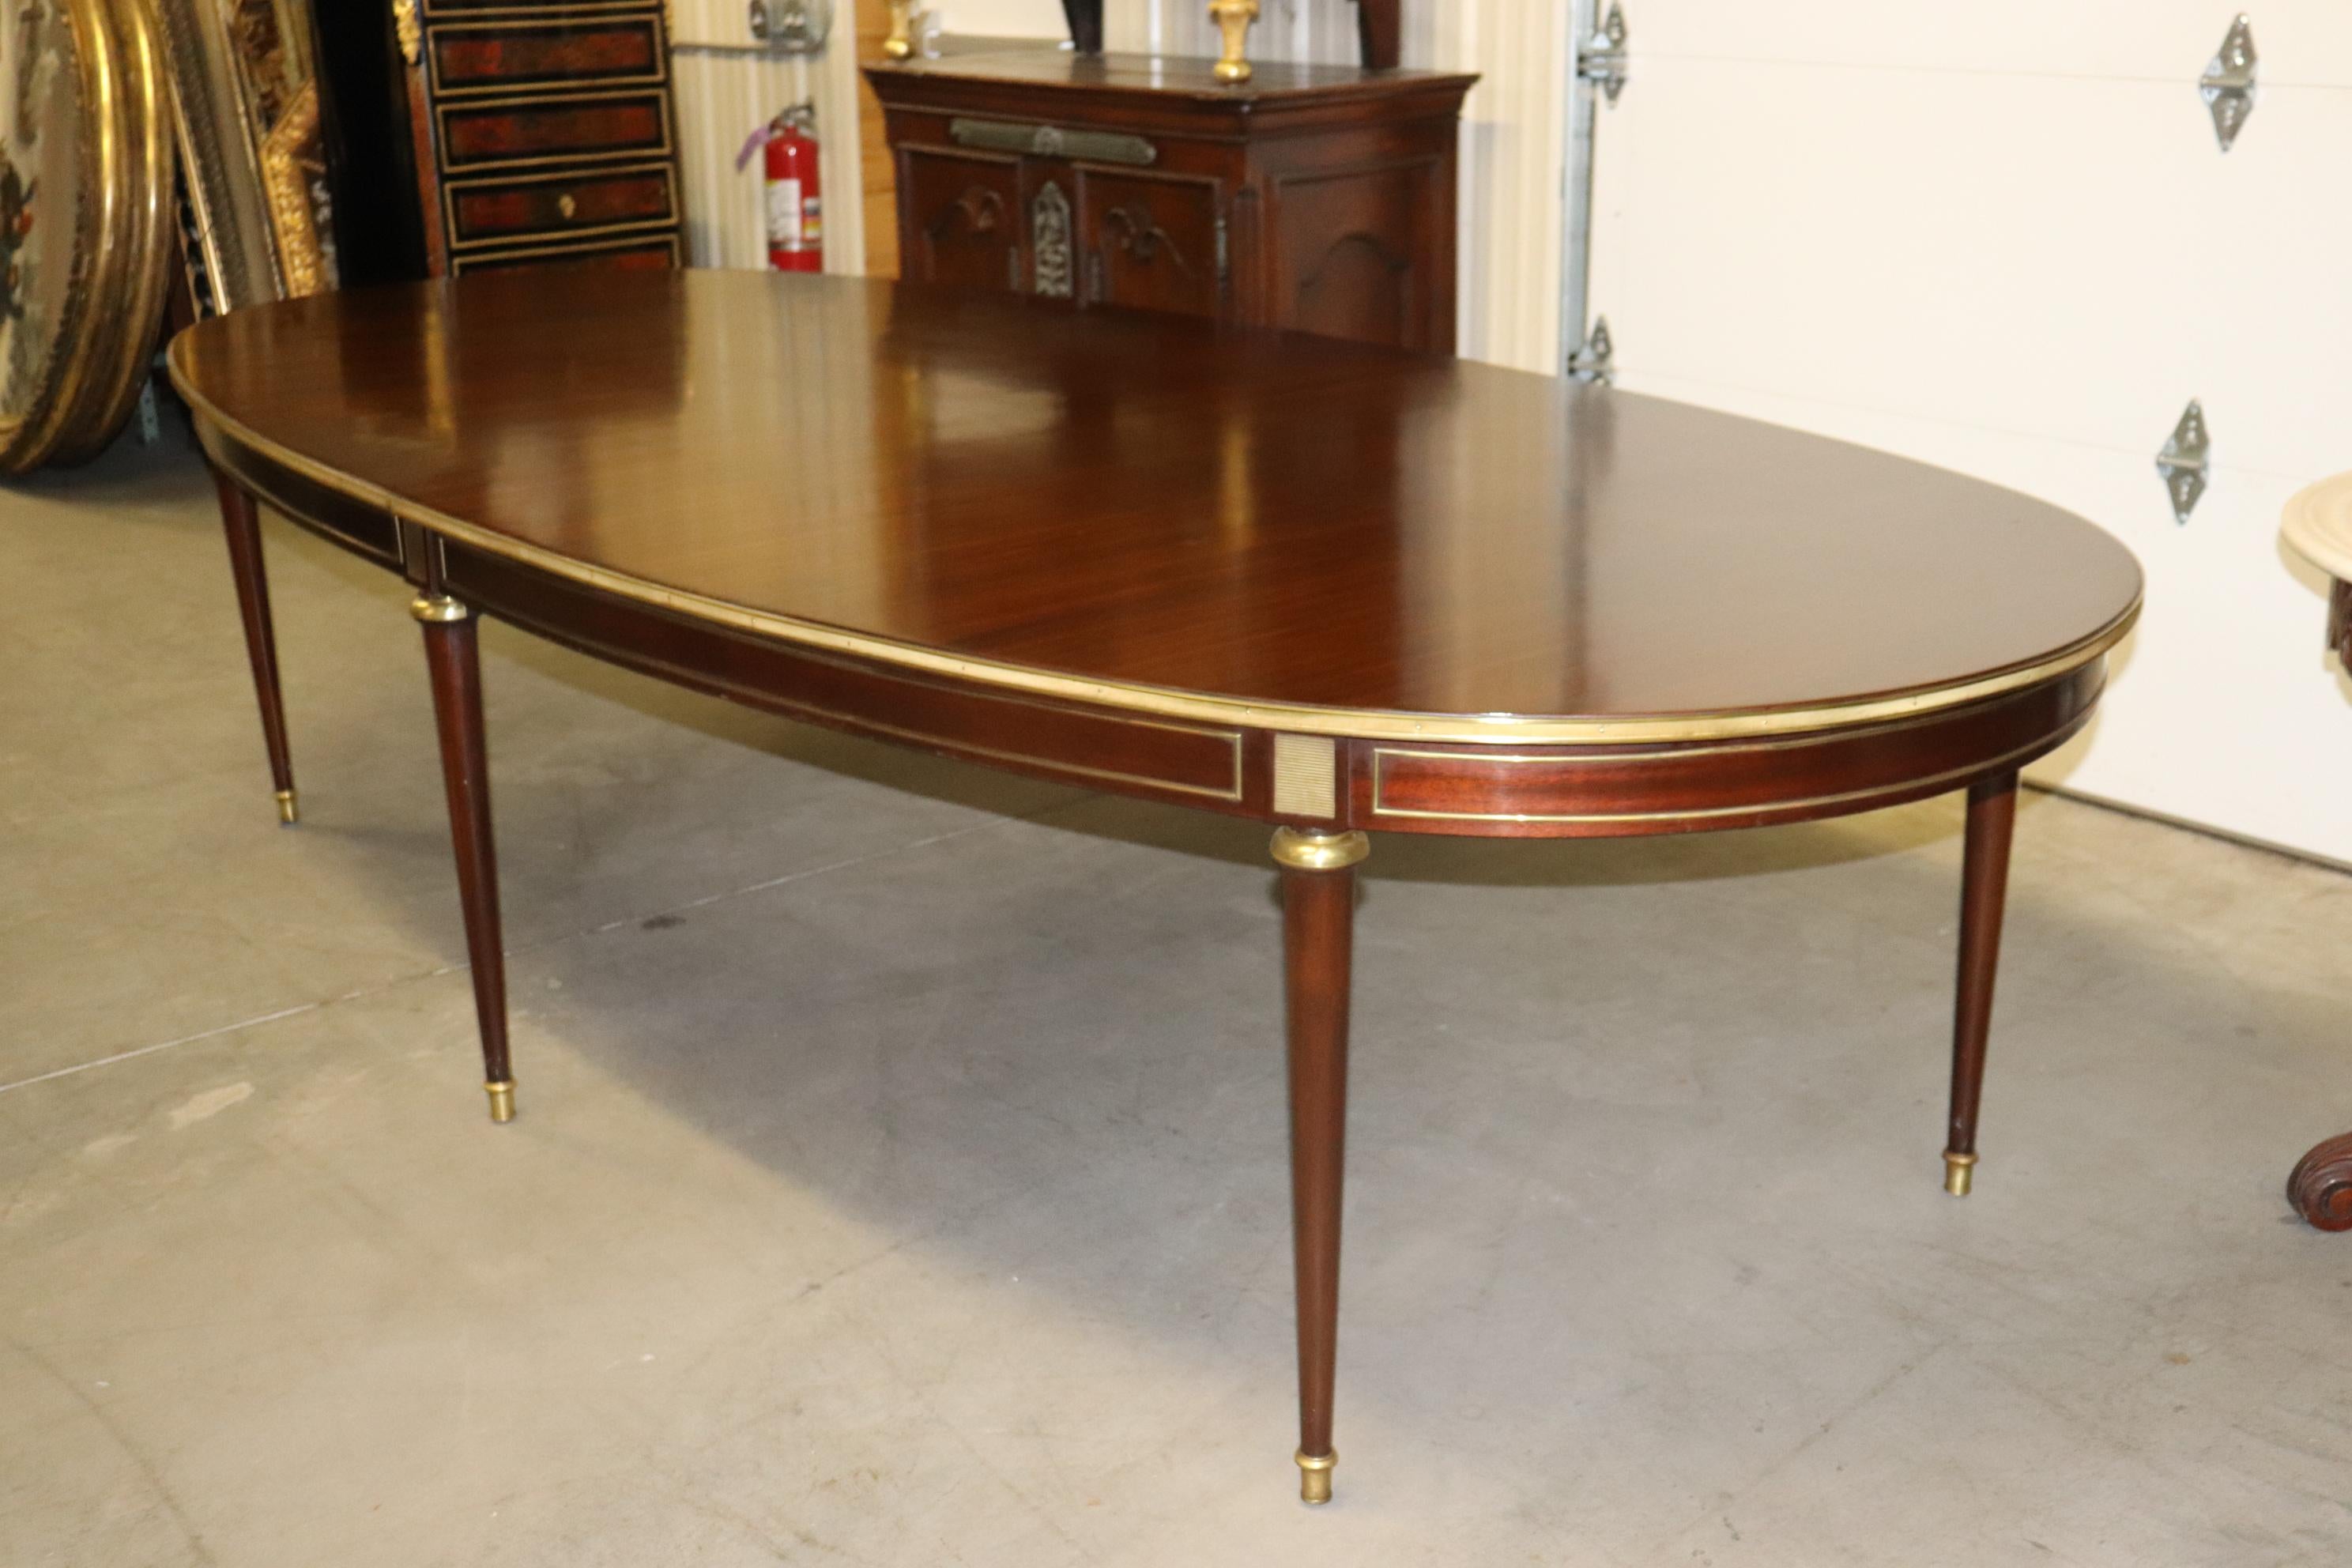 This is a spectcular mahogany and brass mounted conference or dining table. The table is a fixed top and doesn't open or close. The table measures 122 wide x 58 deep x 30.5 tall and has 6 legs and a great original finish on top with minor signs of